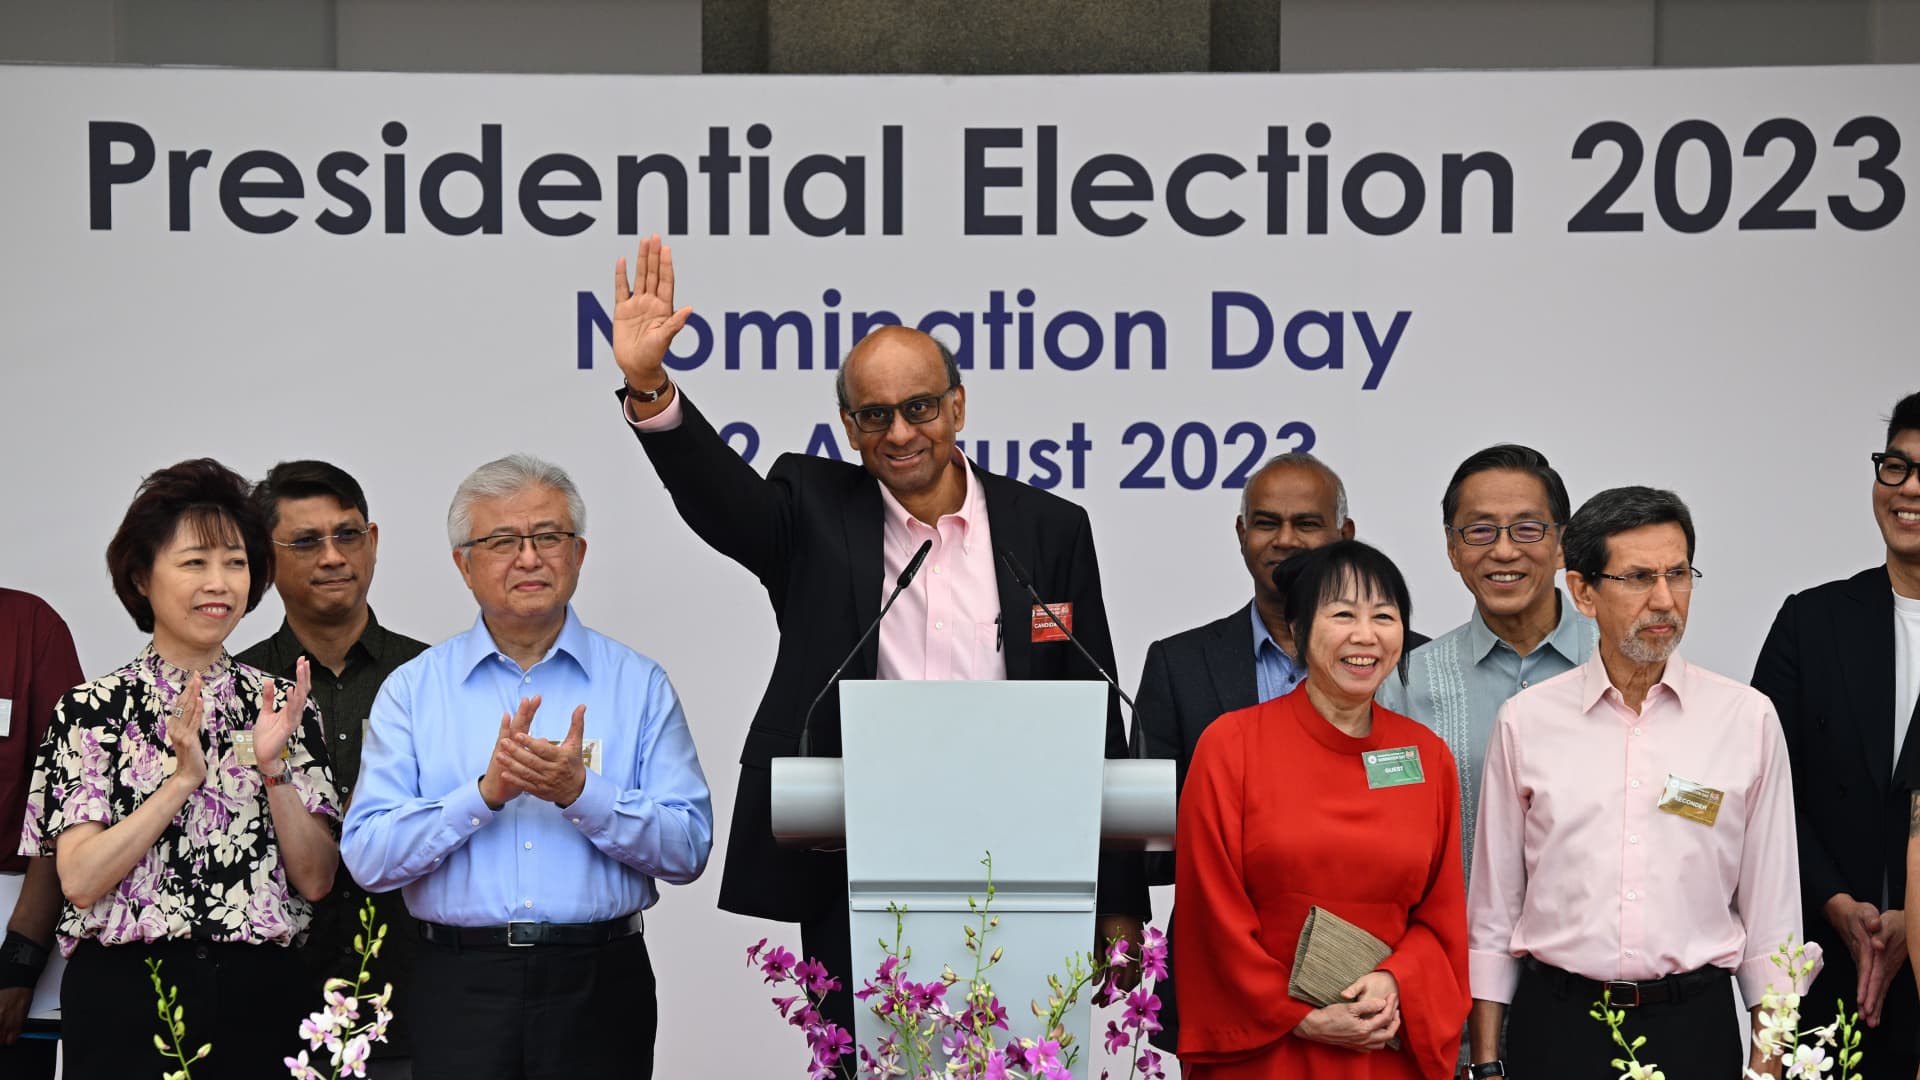 Presidential candidate Tharman Shanmugaratnam waves to his supporters at the nomination center for the upcoming presidential election in Singapore on Aug. 22, 2023. Singapore will hold polls for the presidential election on Sept. 1, Returning Officer Tan Meng Dui announced on Tuesday after three candidates filed nomination documents.